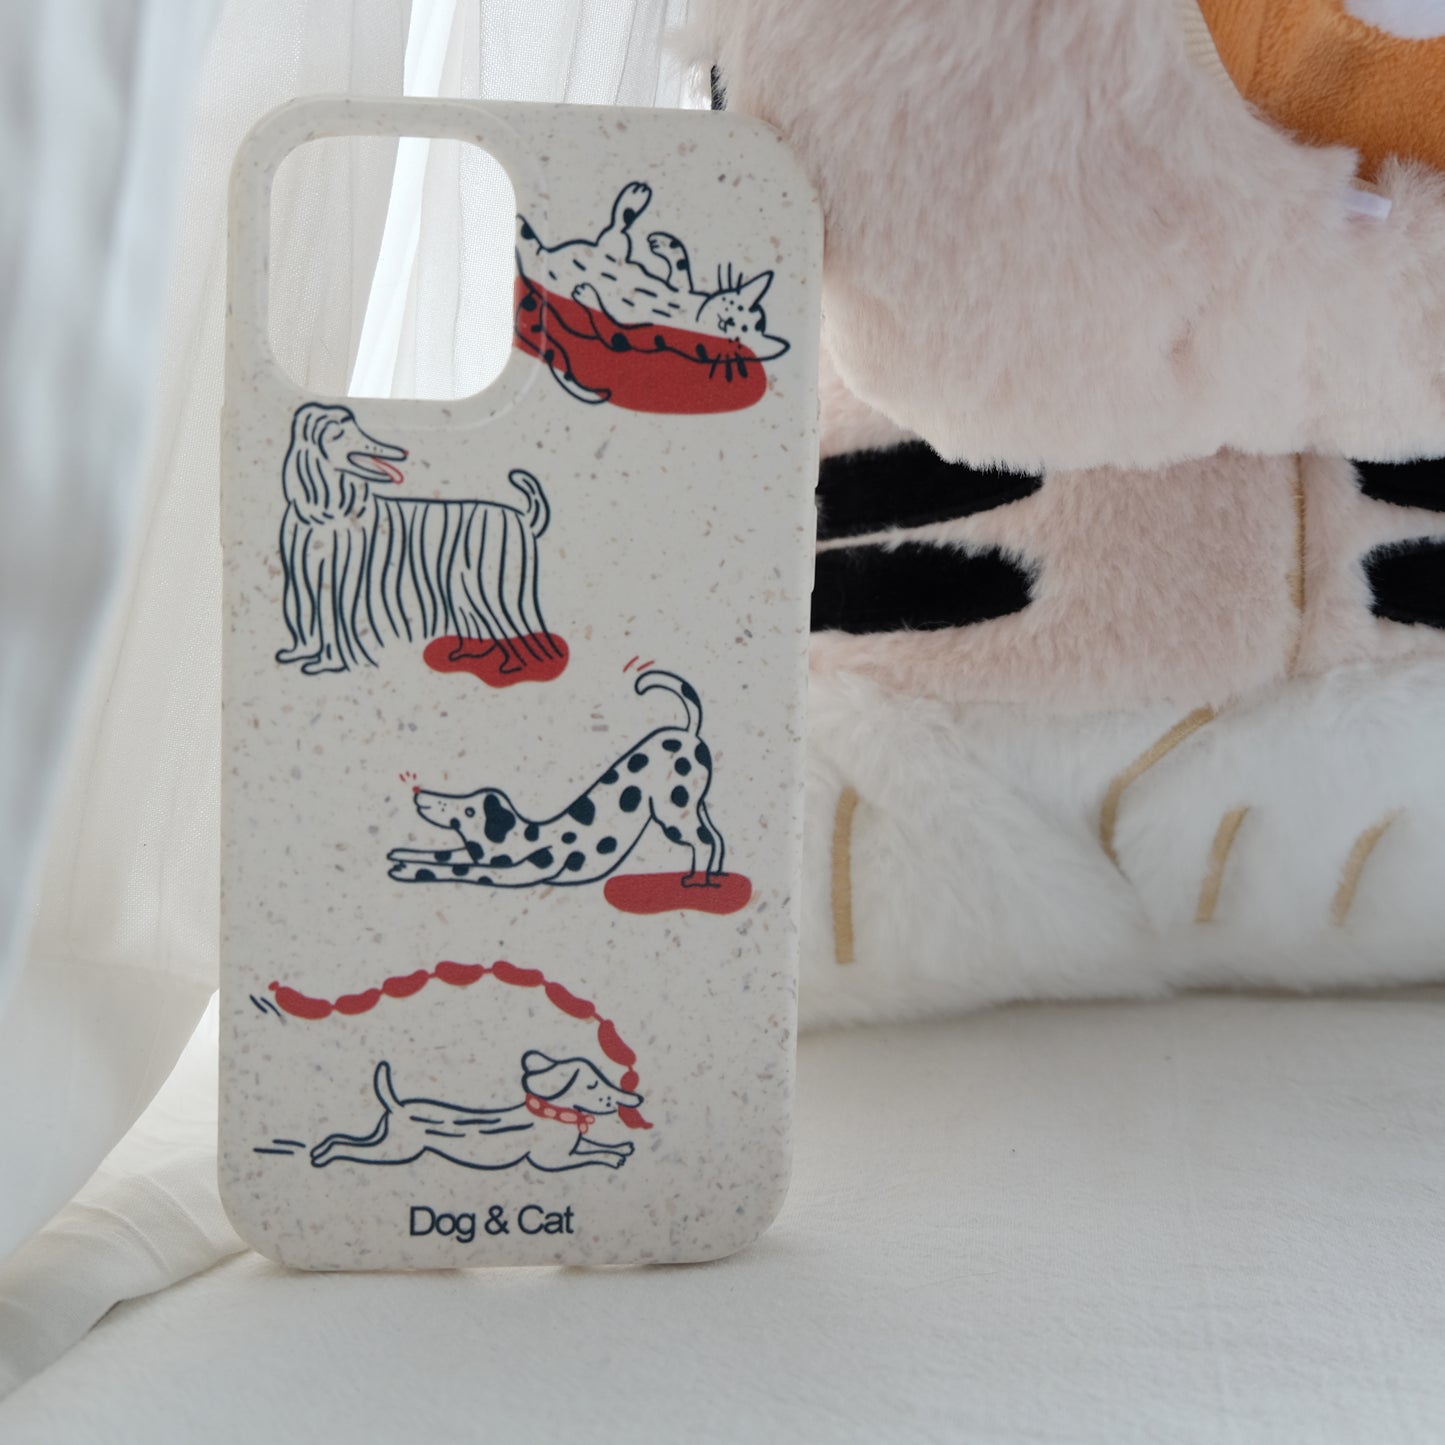 Cat and Dog degradable phone case